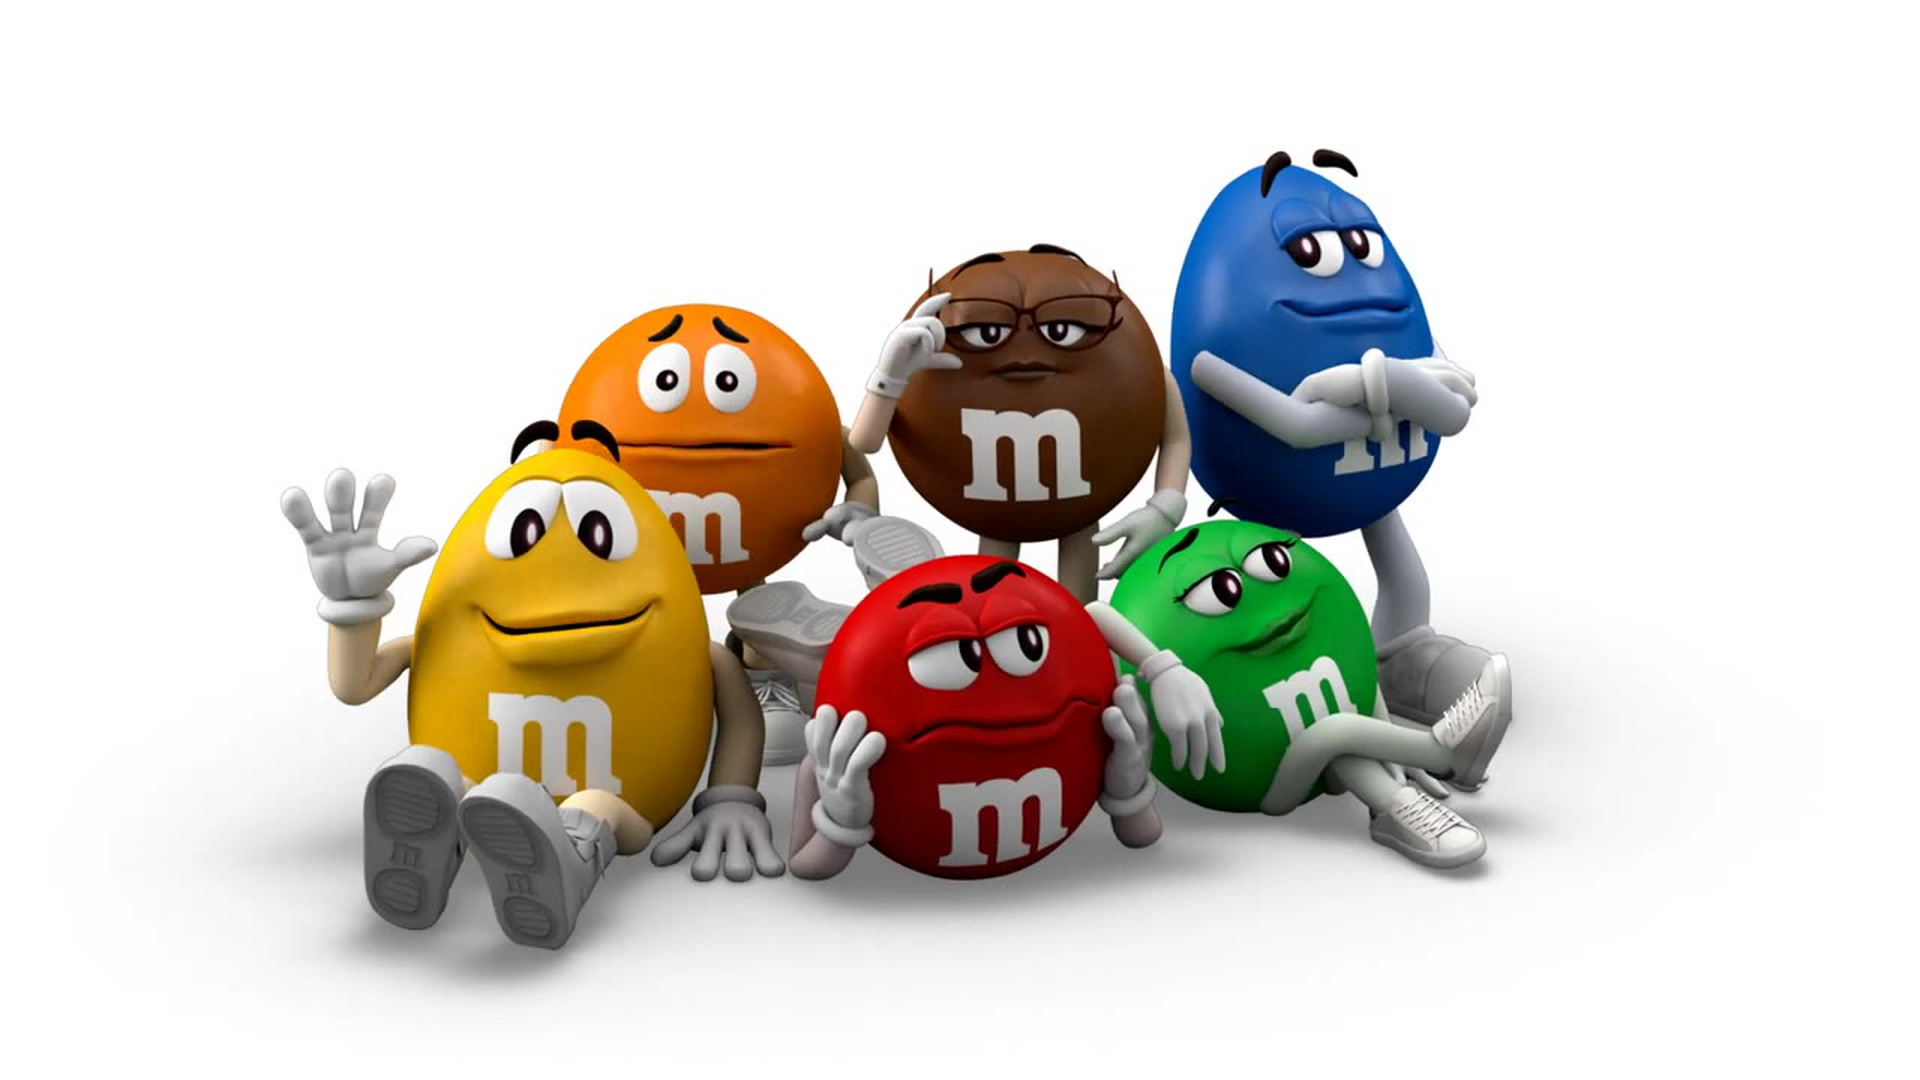 The New Purple M&M's Character Is a Posi Icon